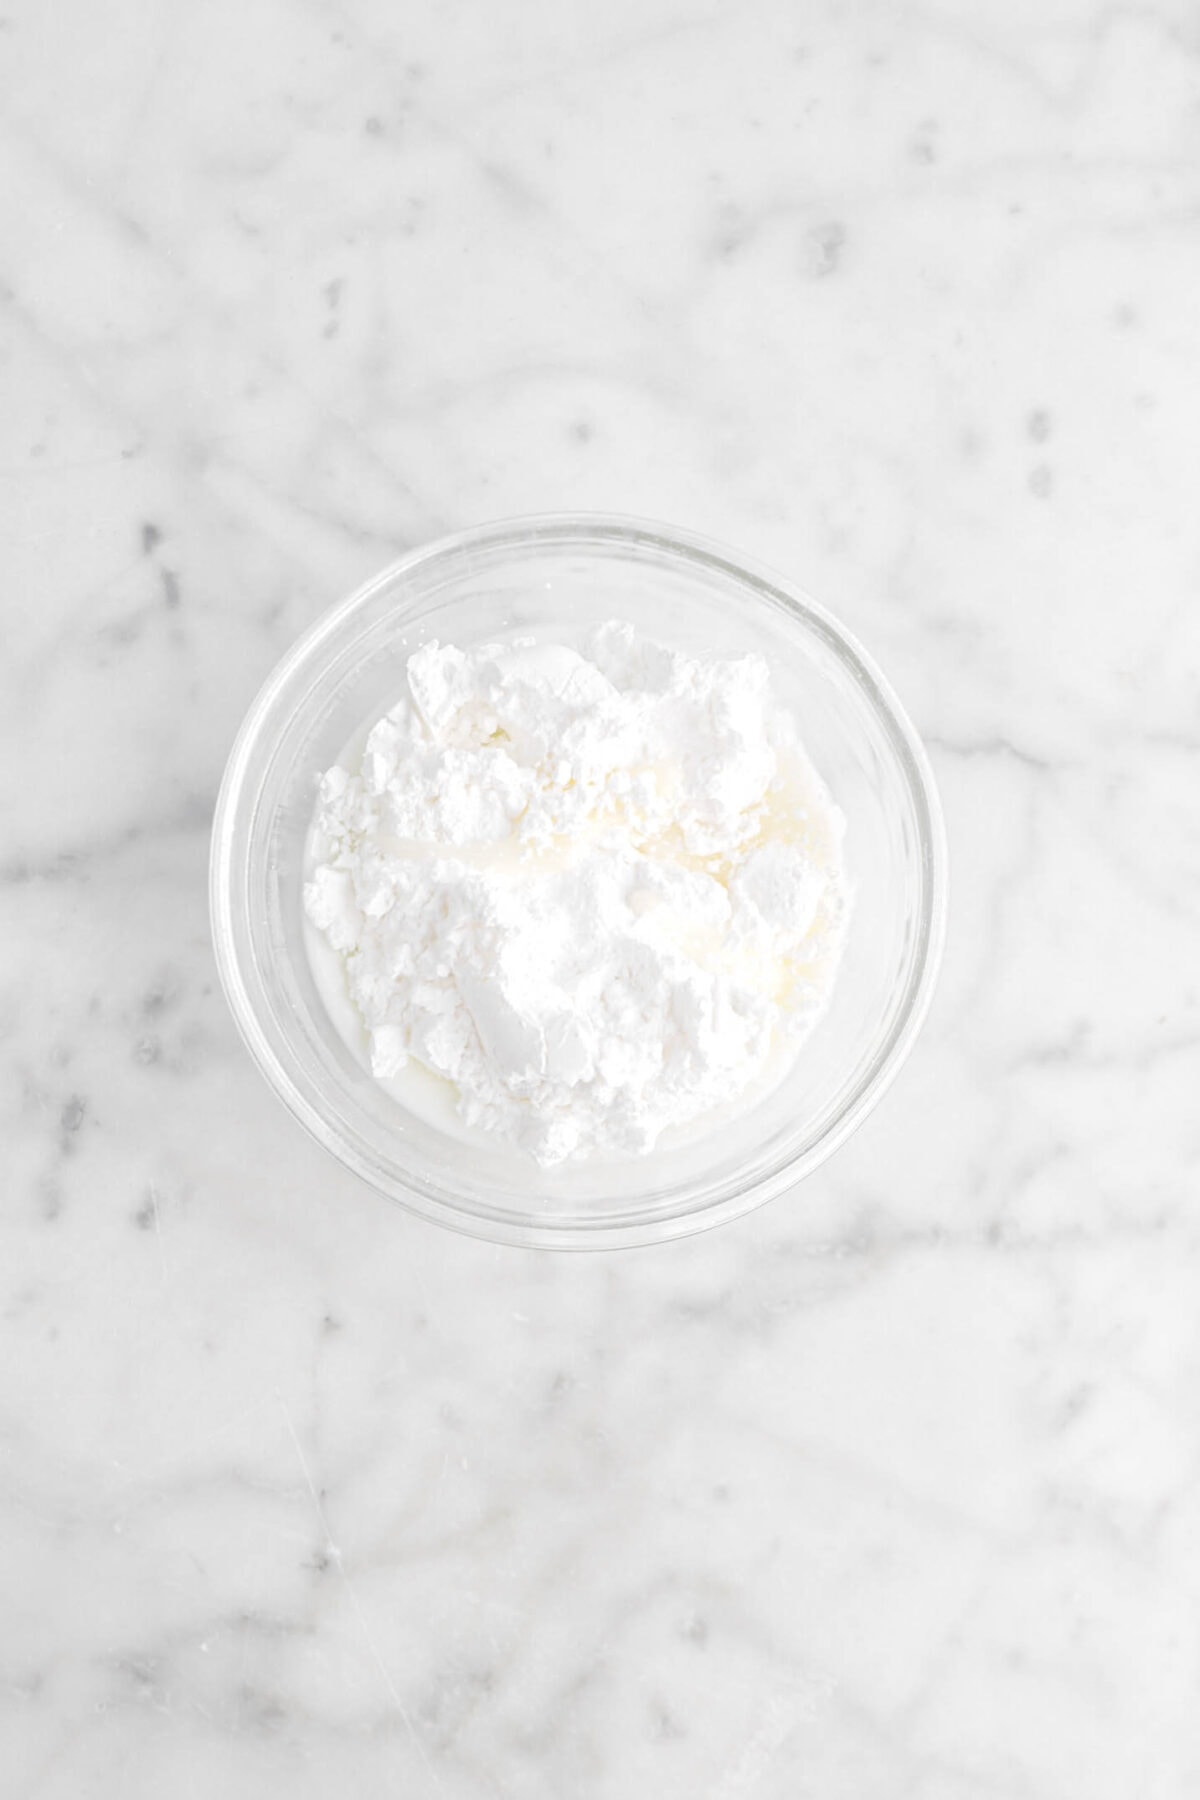 coconut milk and powdered sugar in glass bowl